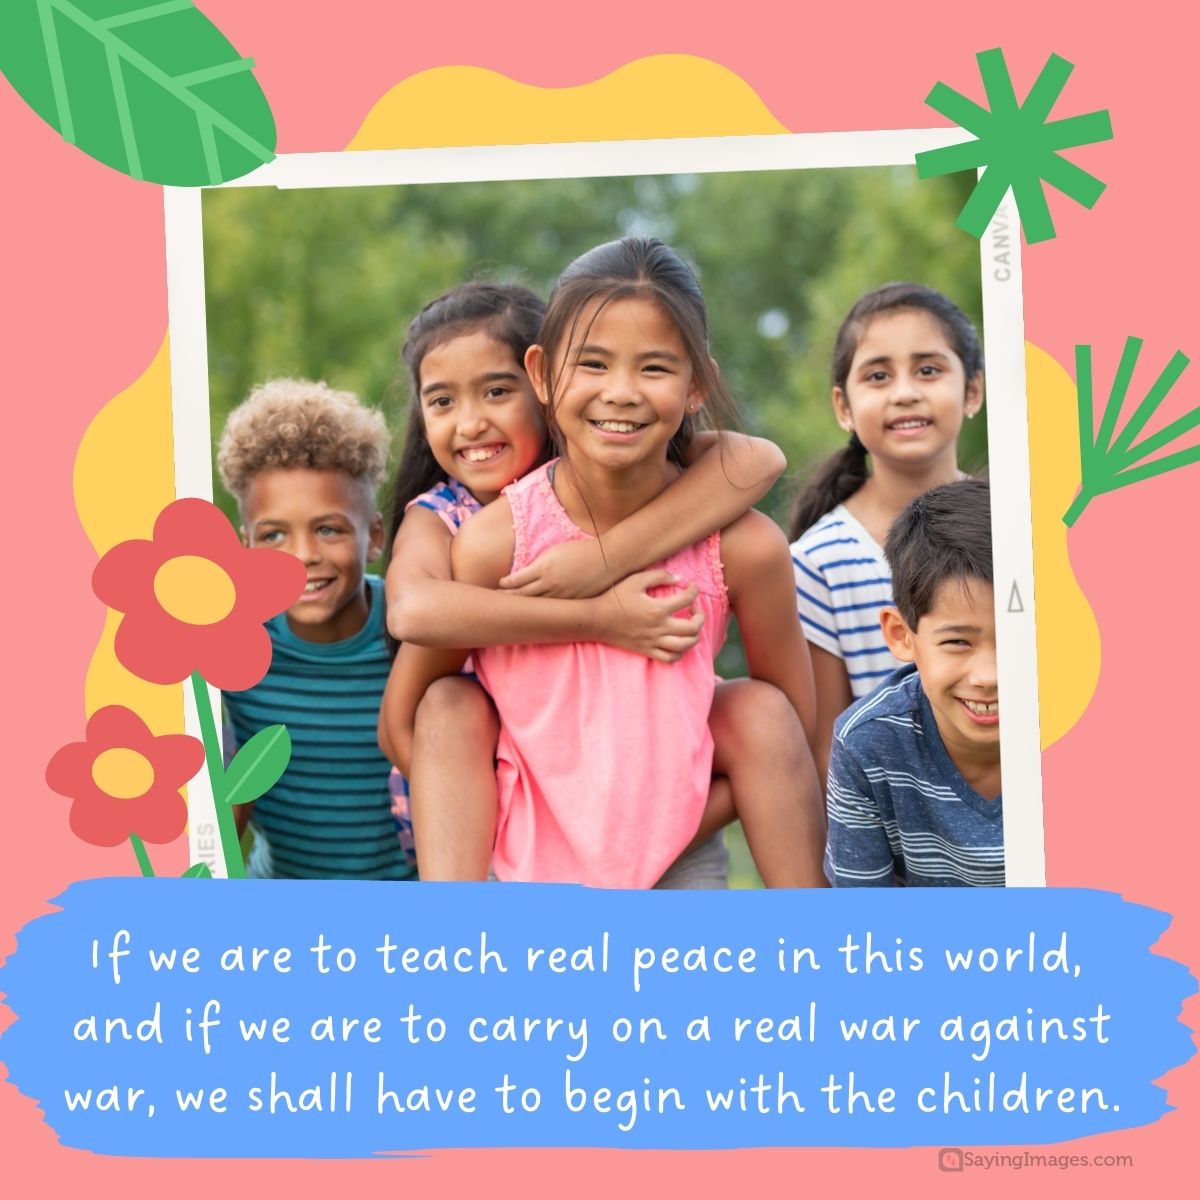 If we are to teach real peace in this world